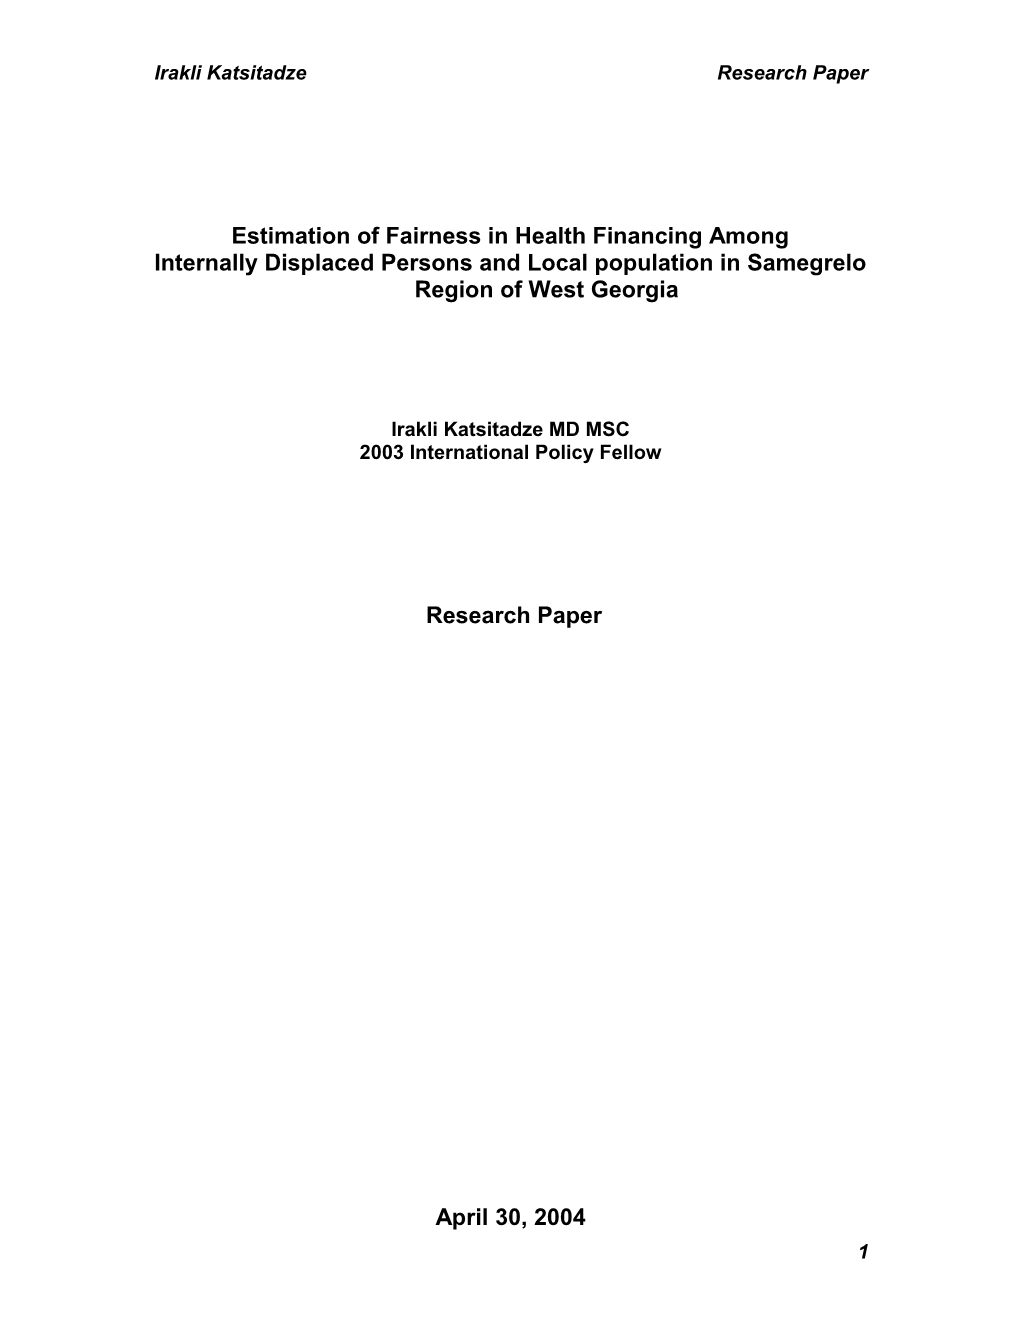 Estimation of Fairness in Health Financing Among